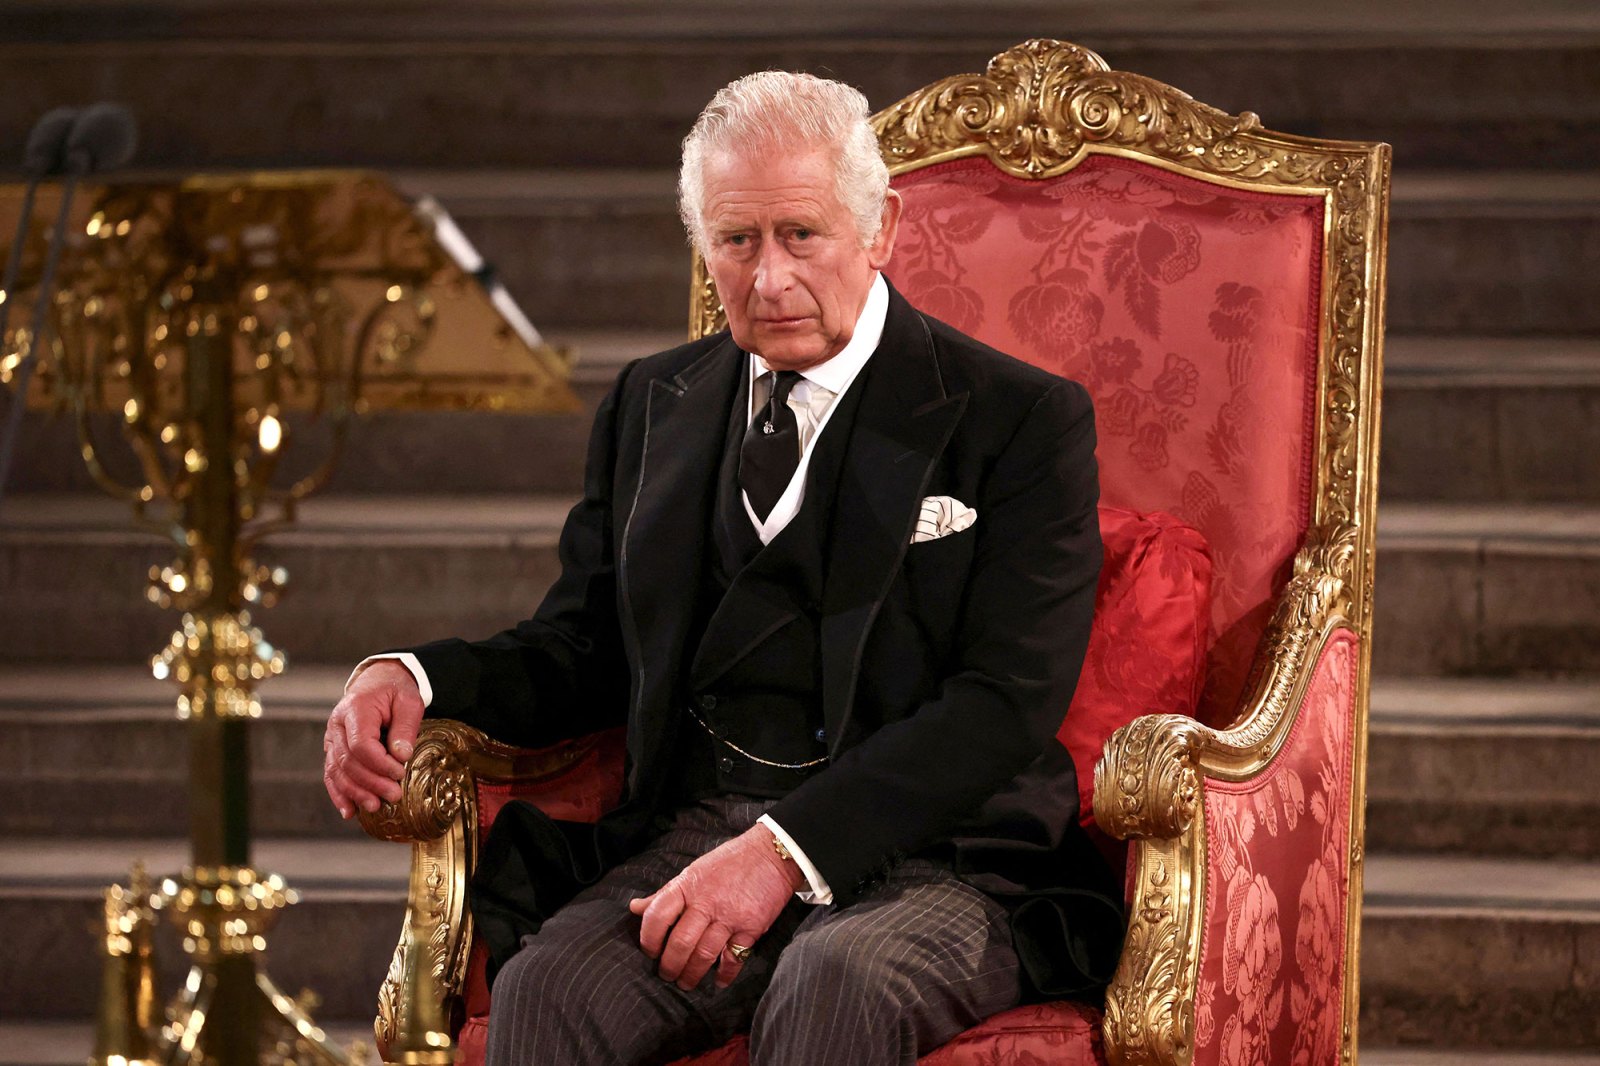 King Charles III and Camilla Queen Consort Sit on the Throne for the 1st Time During Parliament Address 2